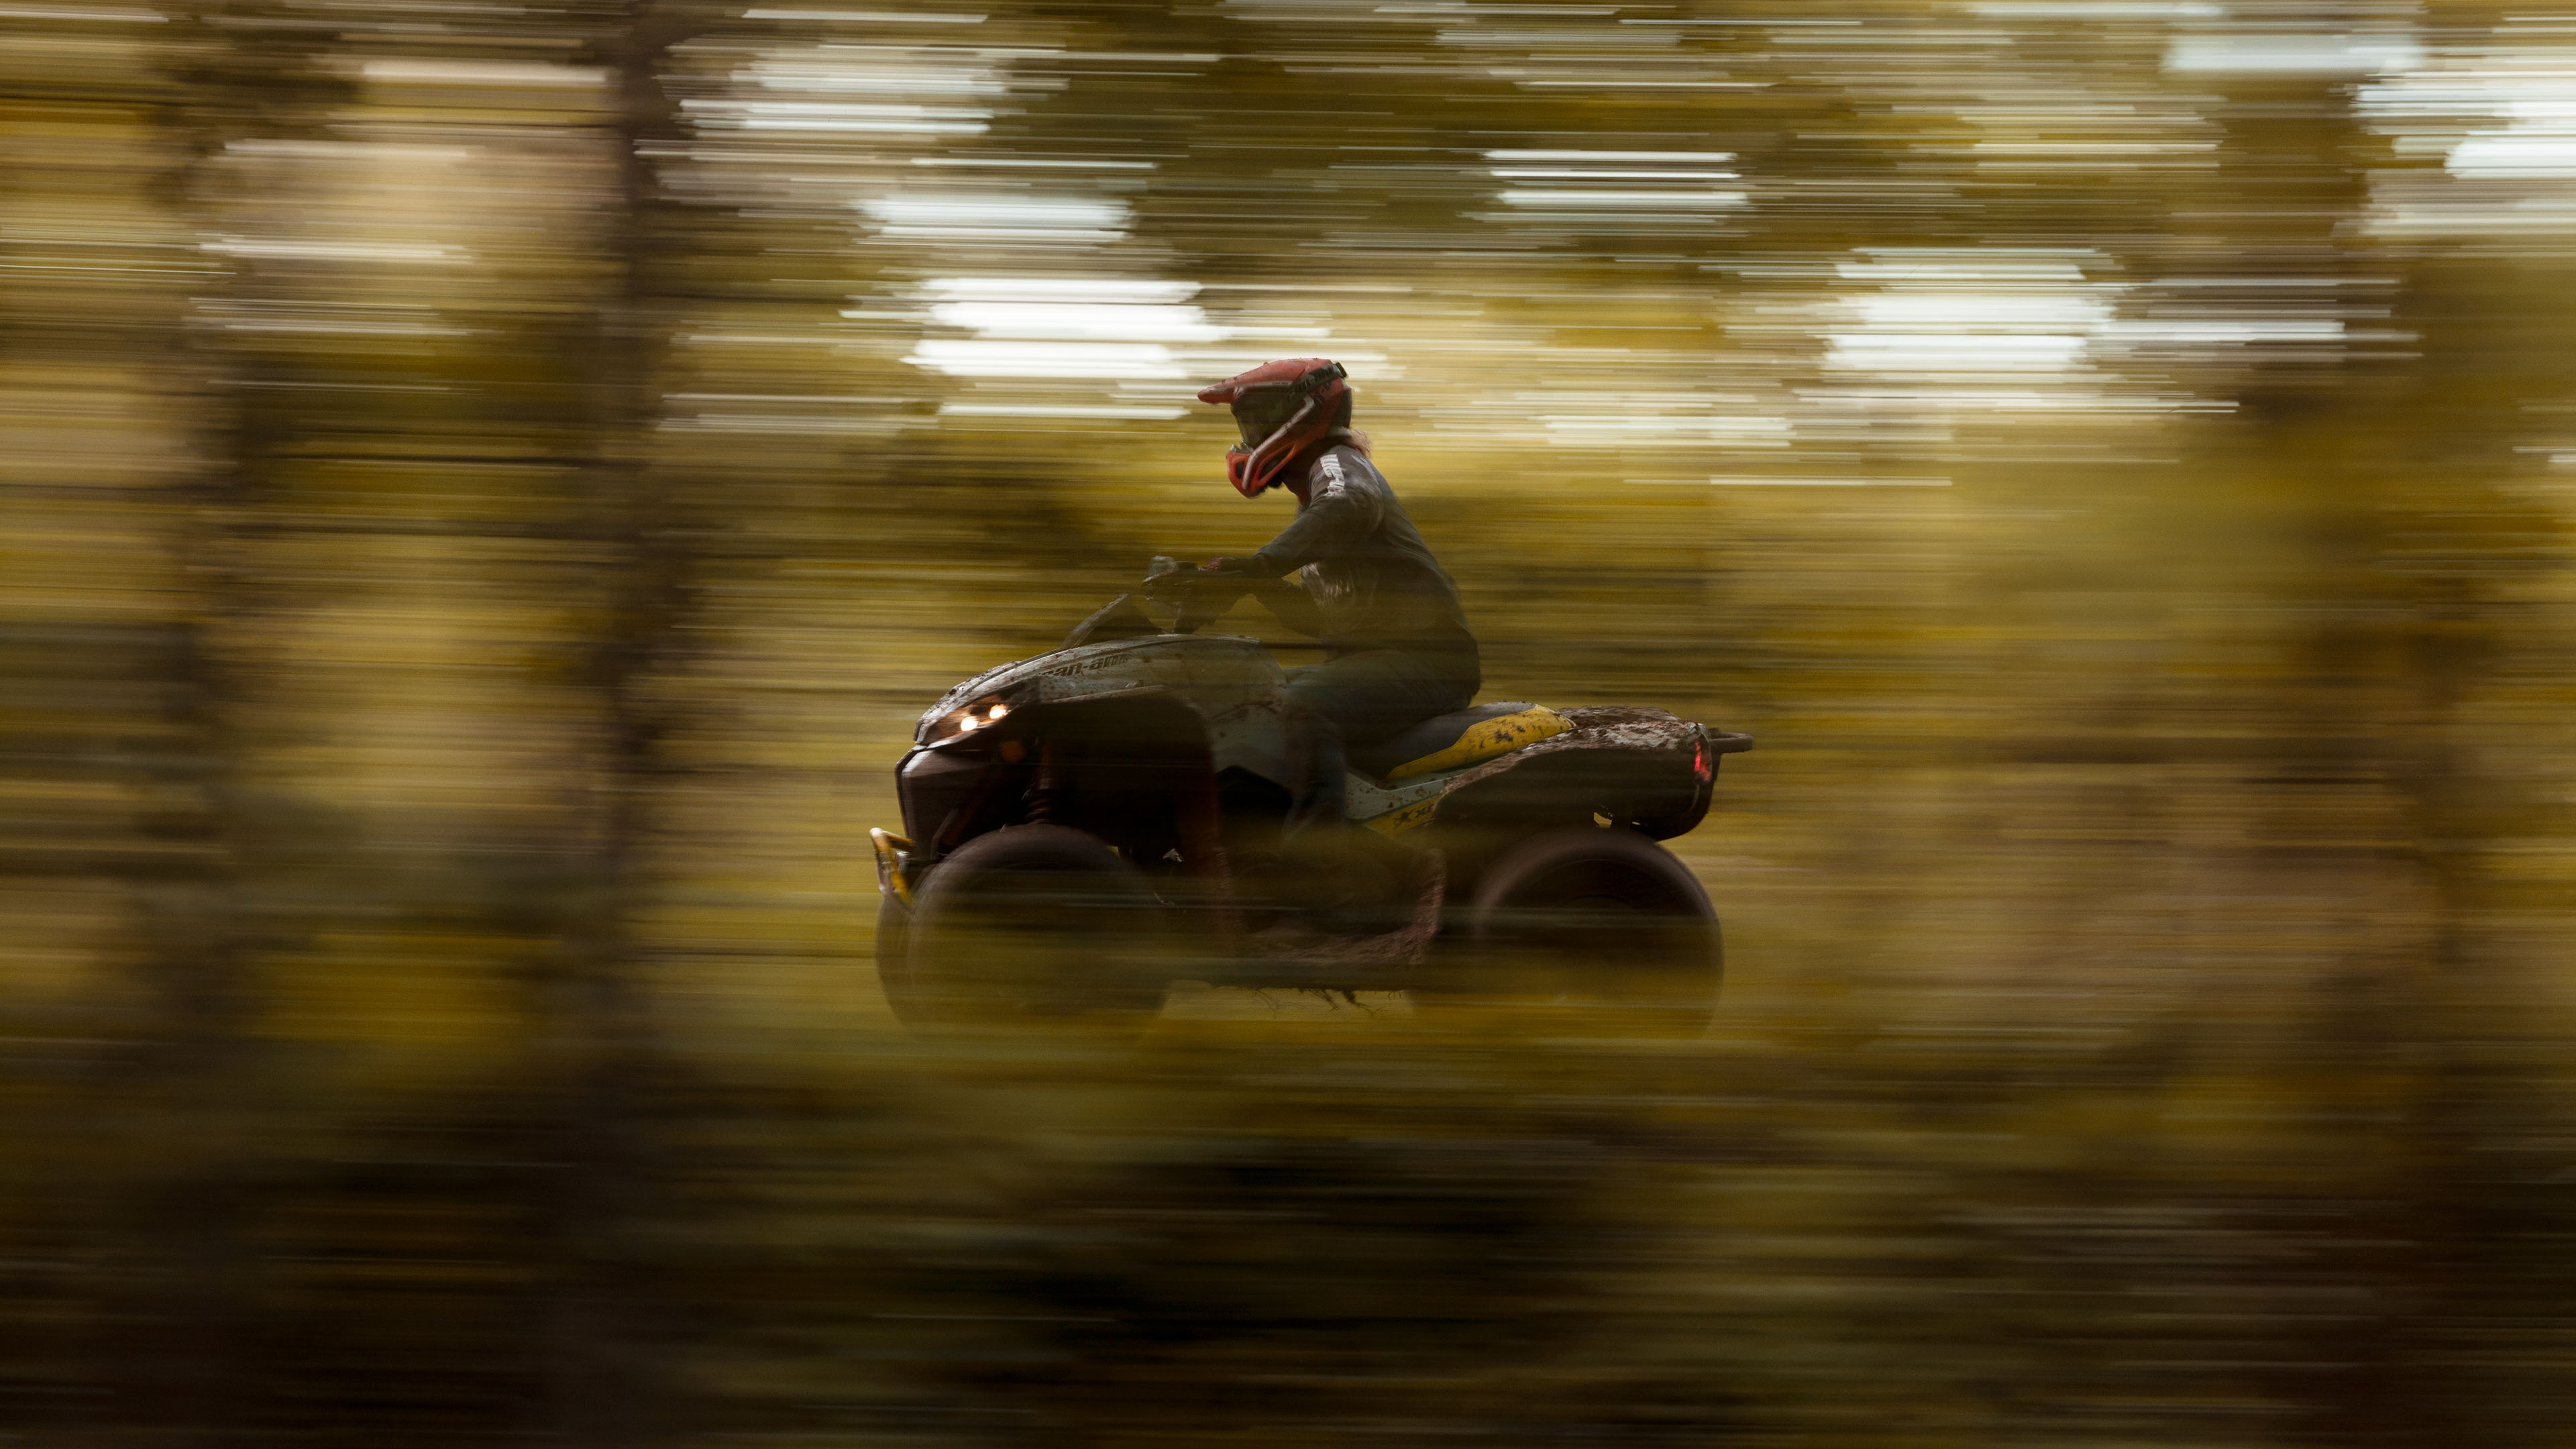 A Can-Am Renegade with blurred surroundings